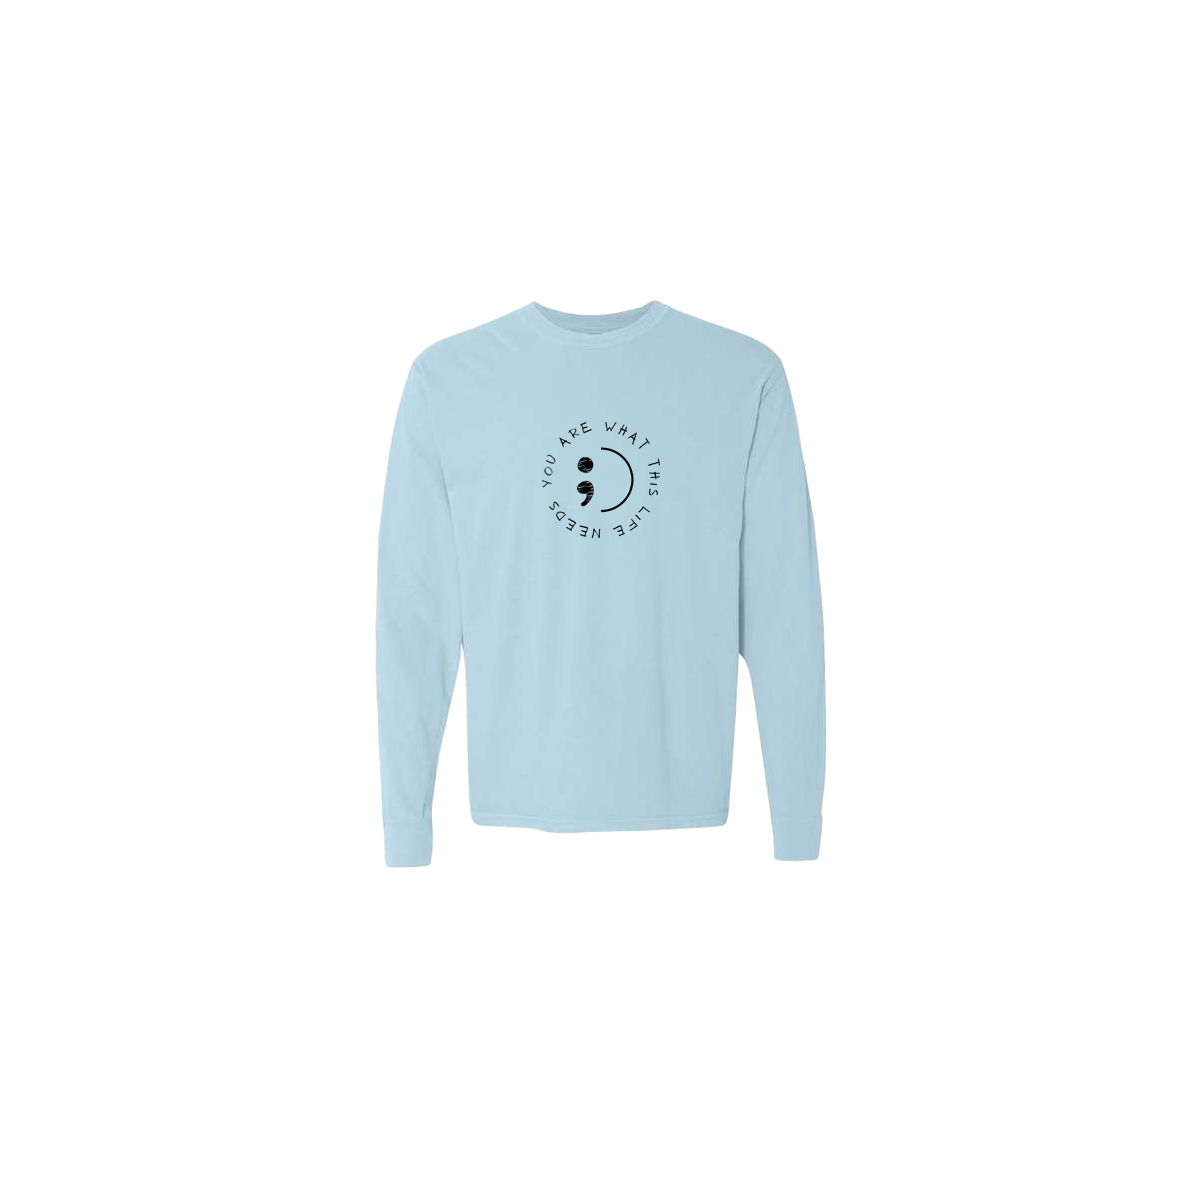 You Are What This Life Needs Embroidered Light Blue Long Sleeve Tshirt - Mental Health Awareness Clothing